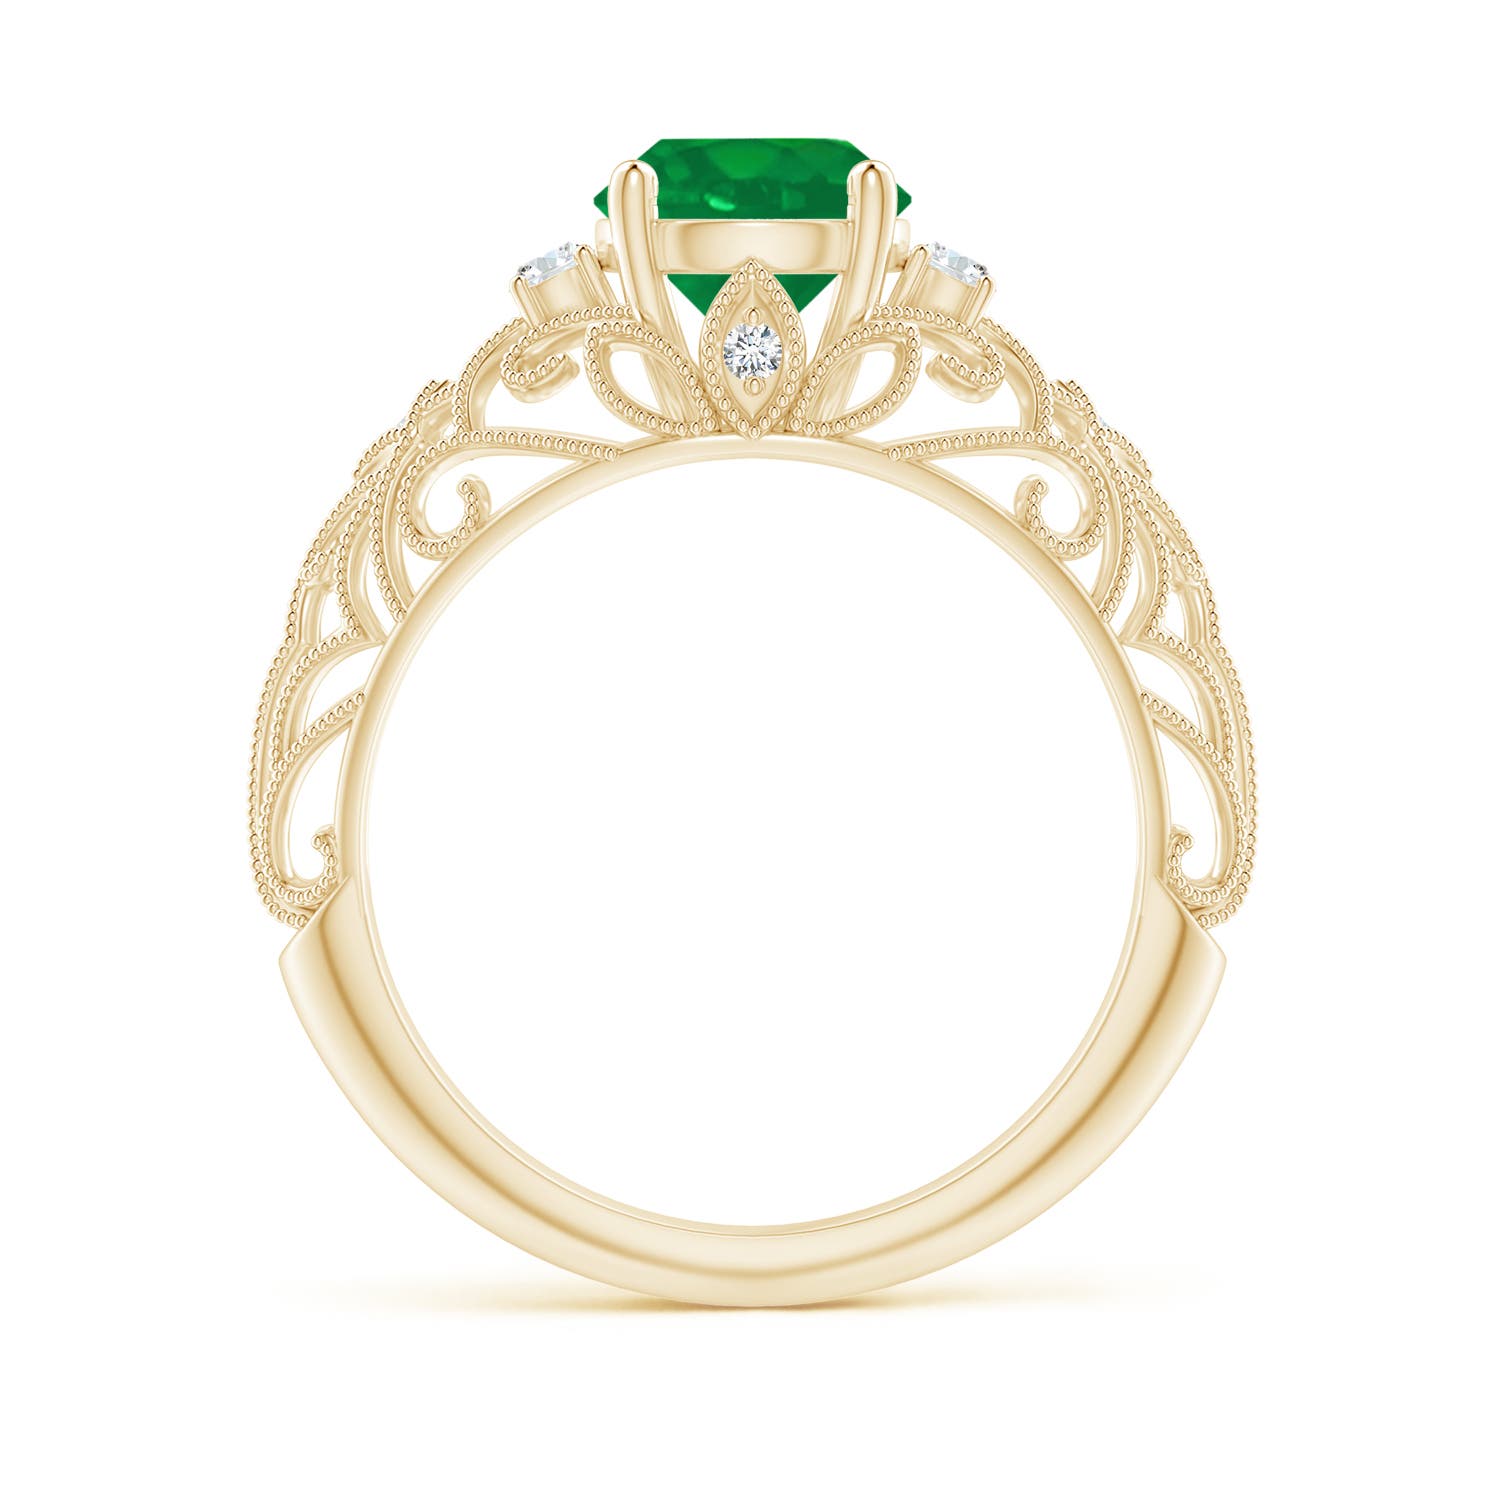 AA - Emerald / 1.3 CT / 14 KT Yellow Gold